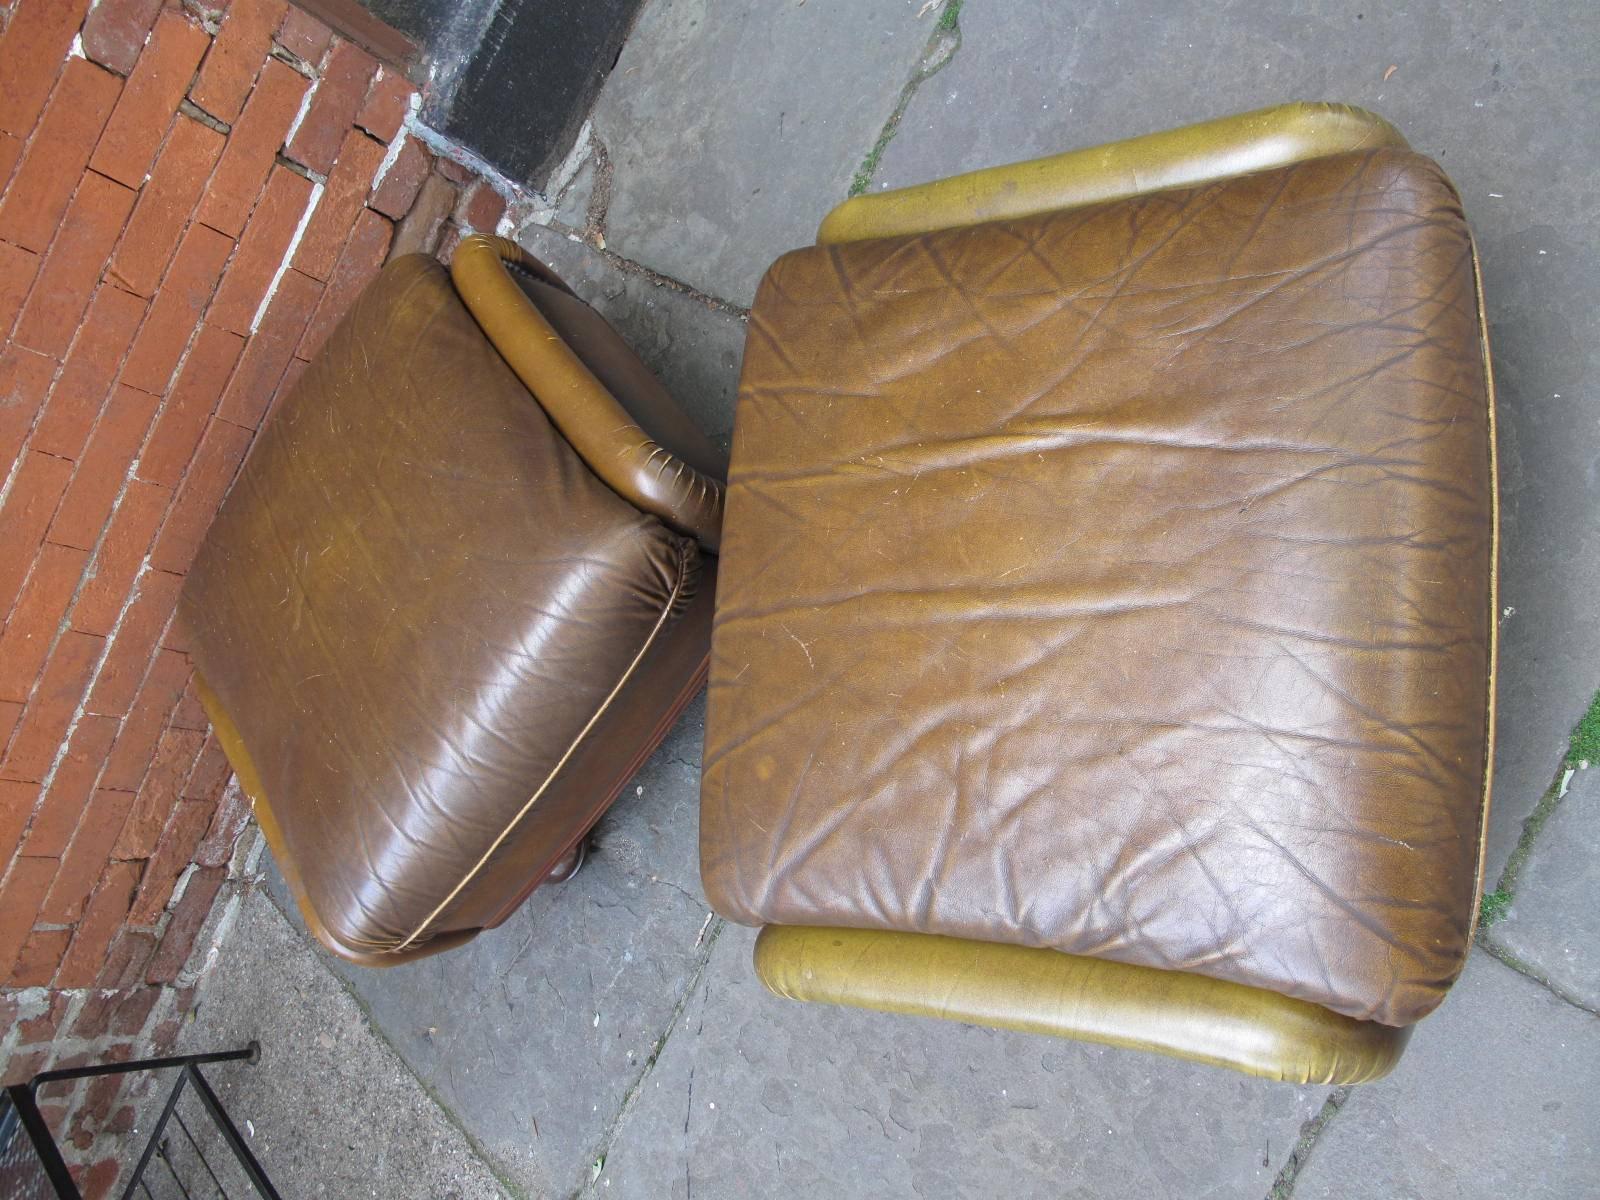 20th century American footstools in olive leather with nailhead details. Available individually.